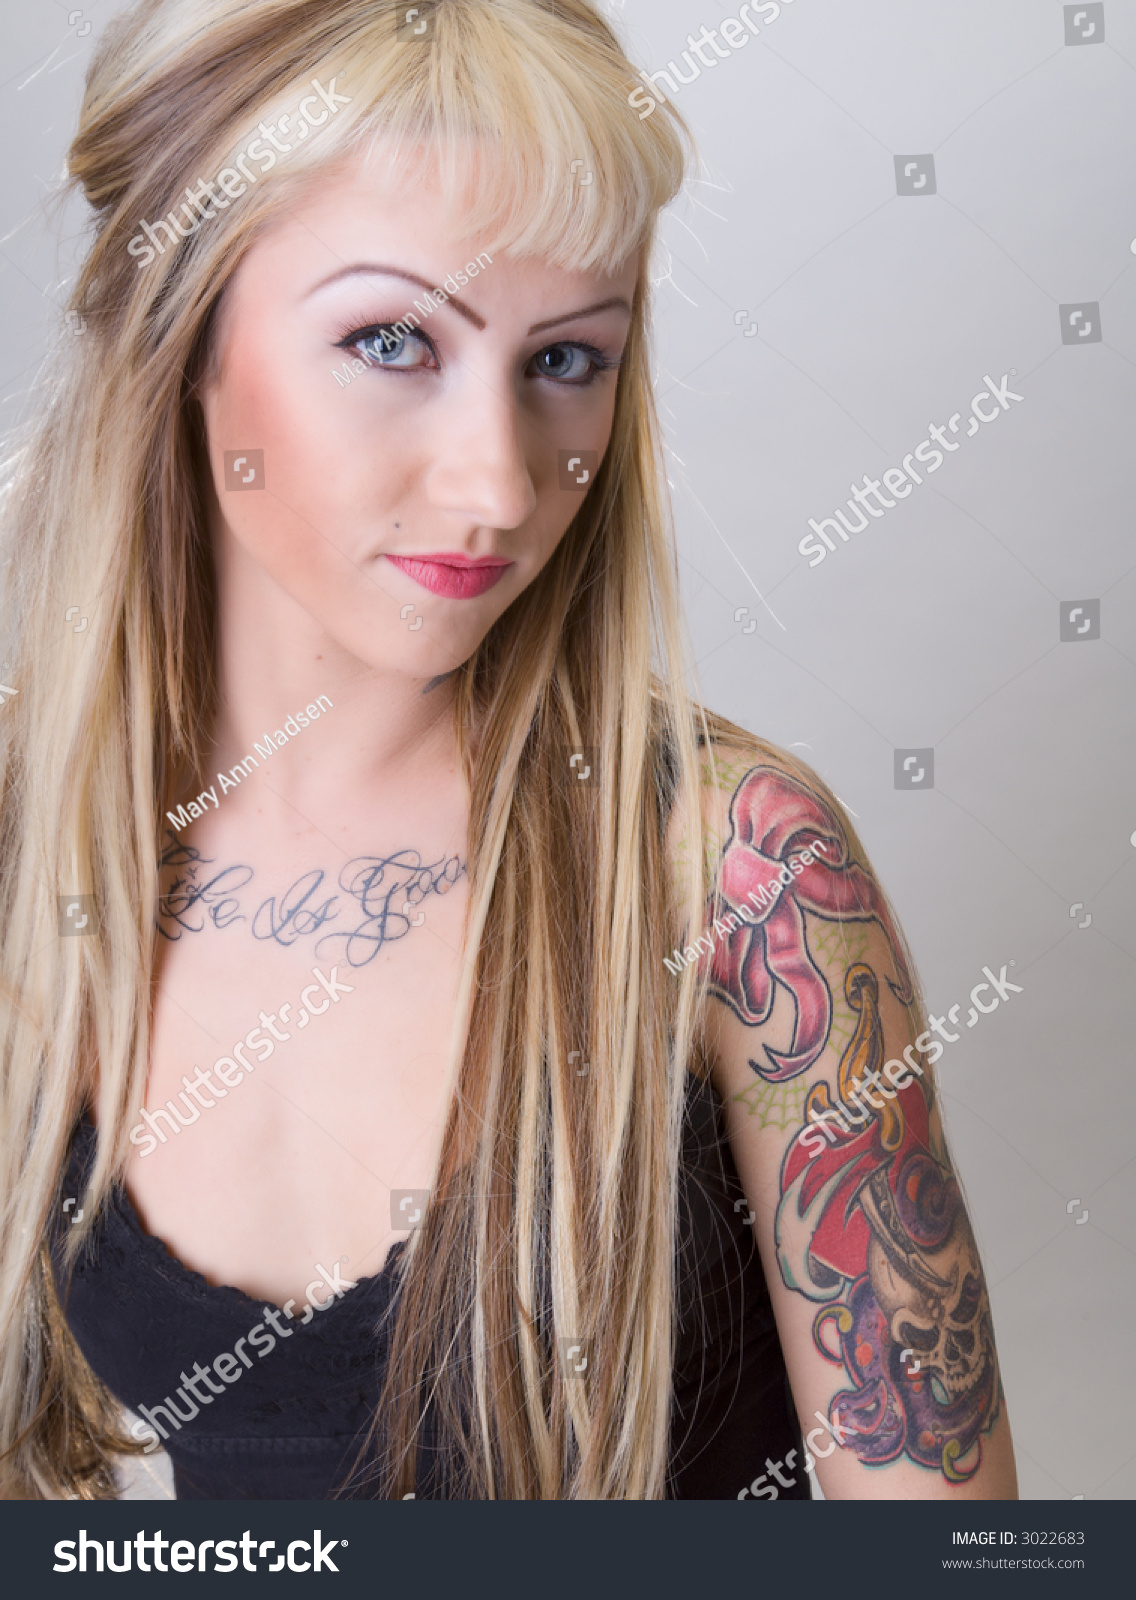 Blonde Biker Chick Covered In Tattoos And A Smug Expression Stock Photo ...